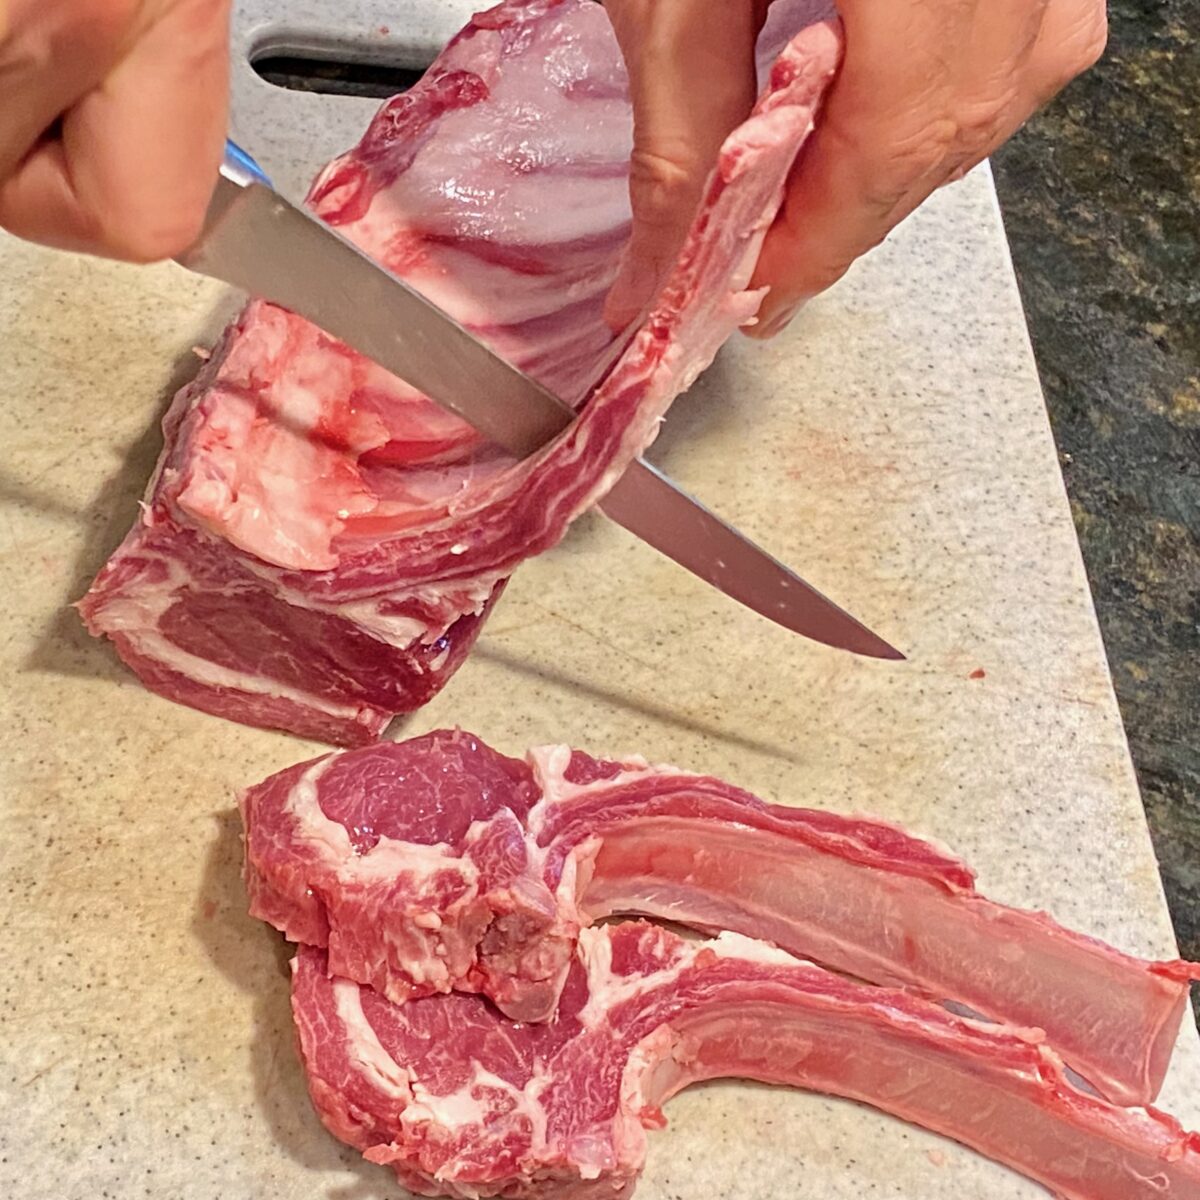 SIde view of a knife slicing off a lamb chop from a rack of lamb.